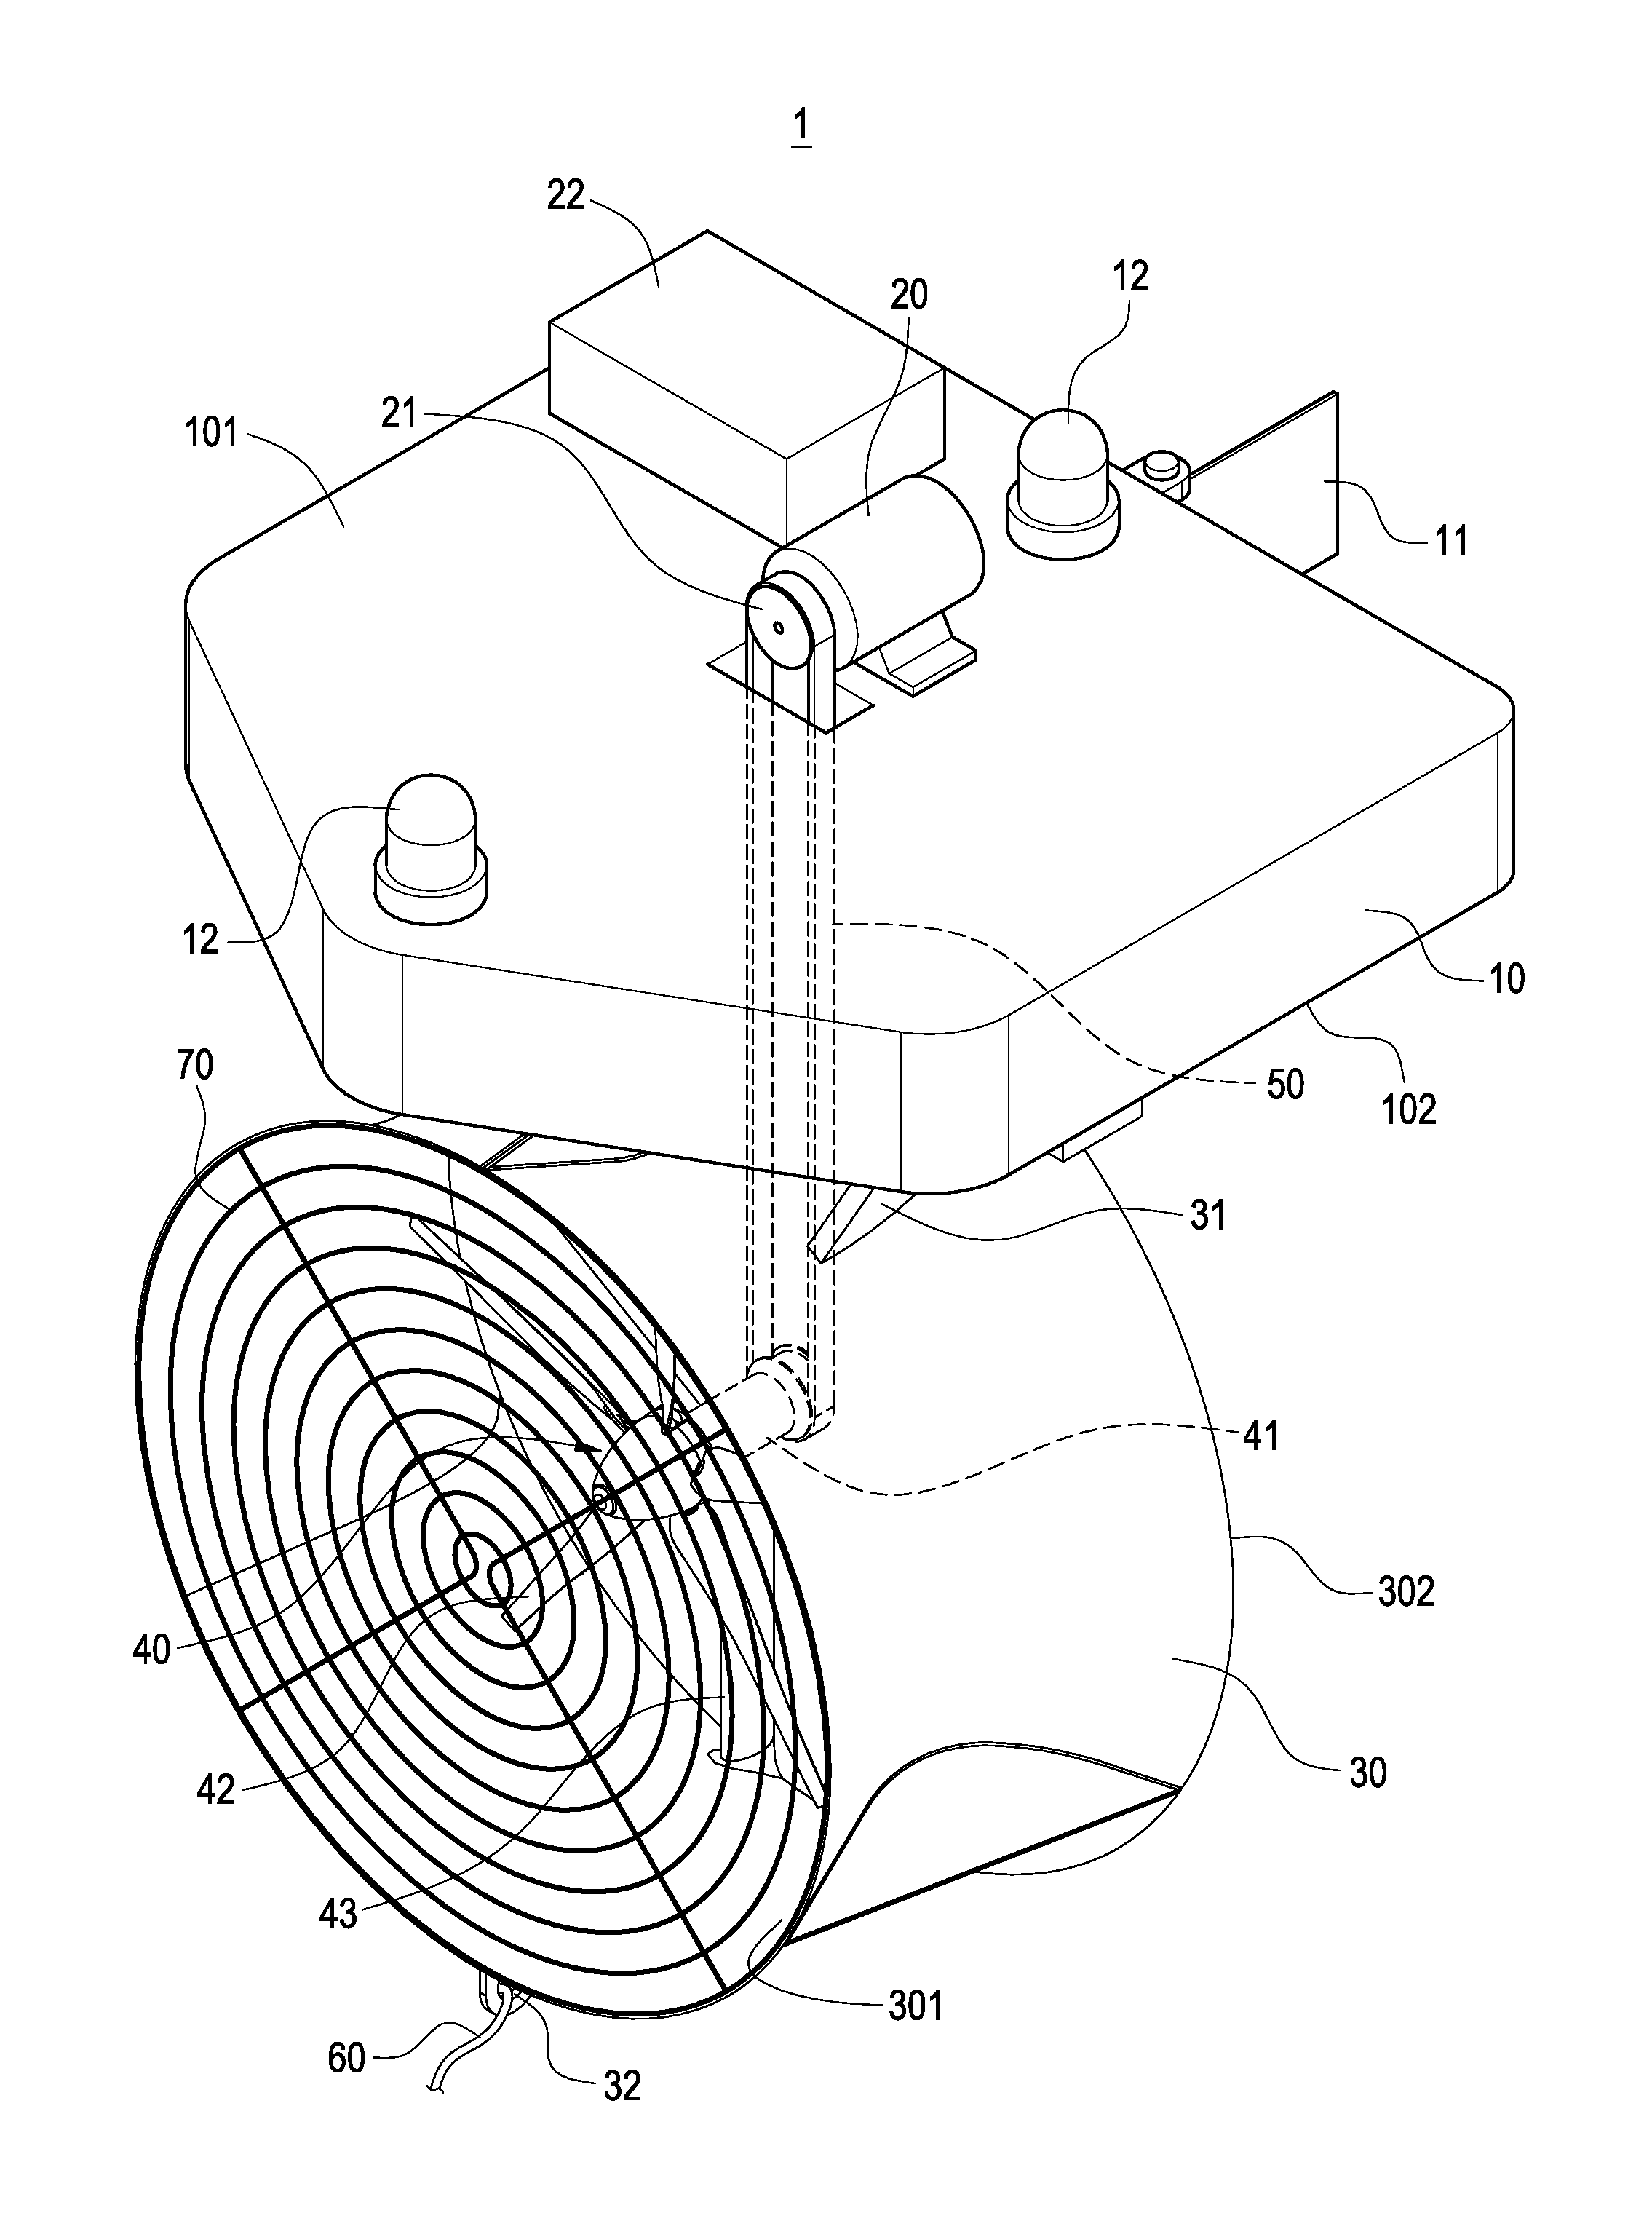 Run-of-river hydroelectric power generation apparatus